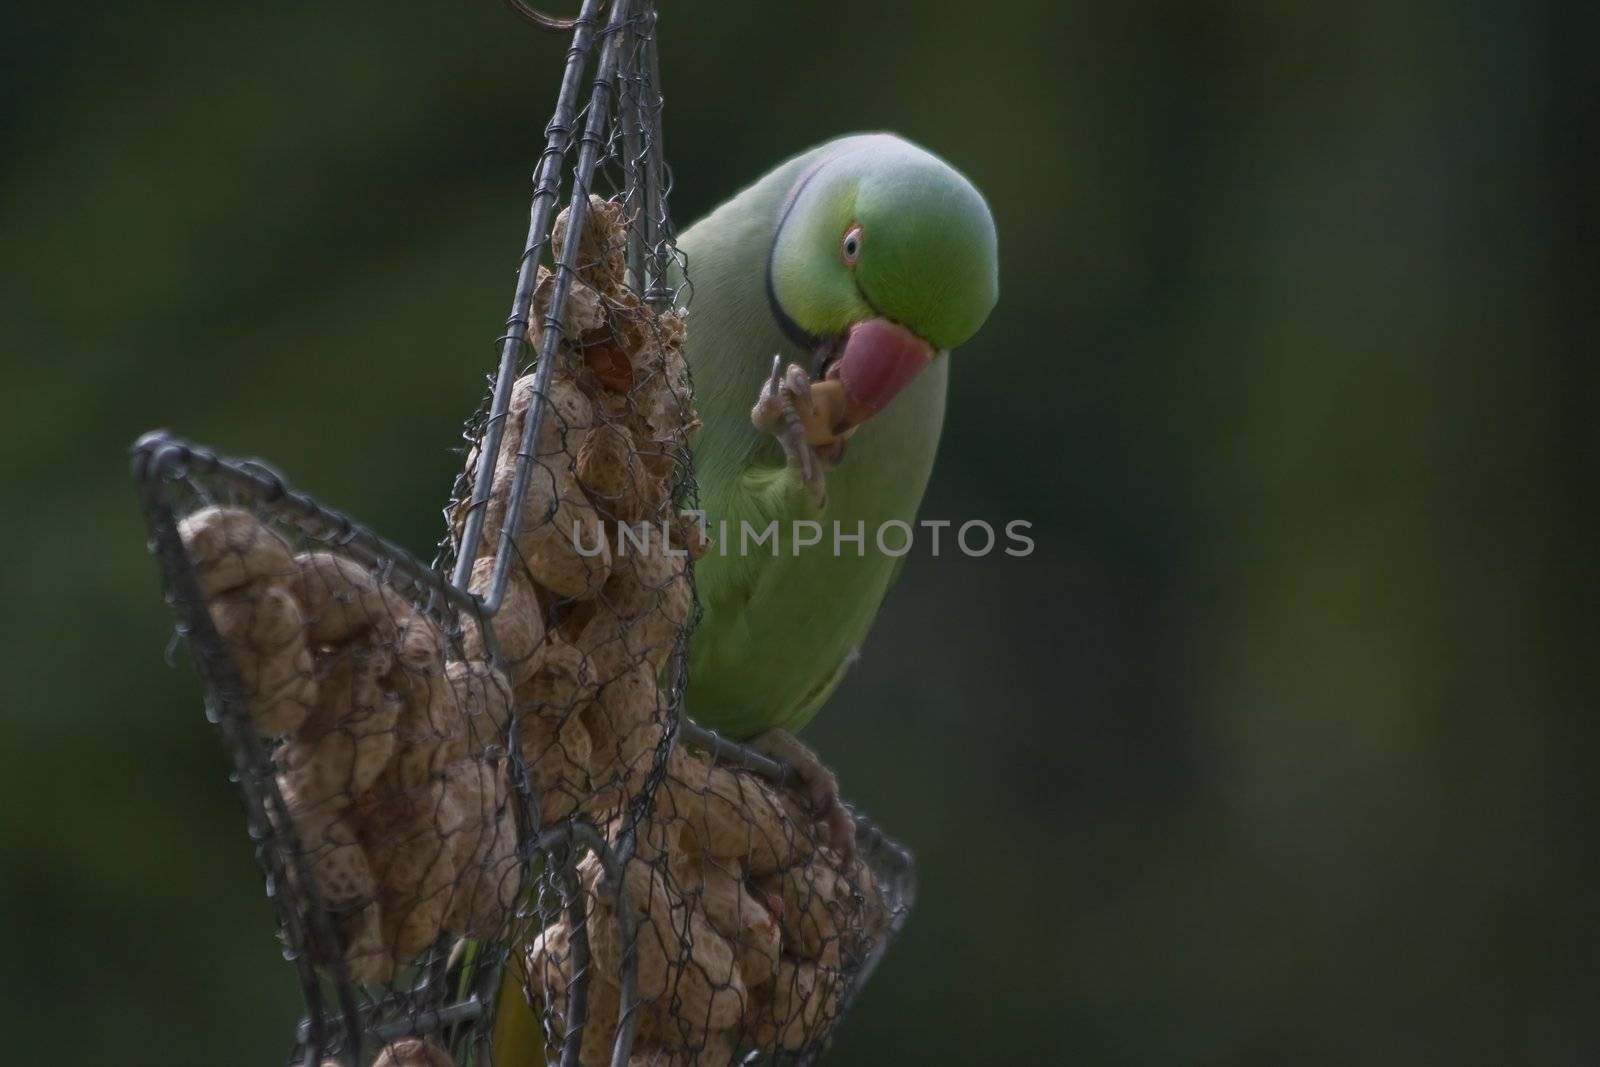 Rose-ringed parakeet eating peanuts by Colette